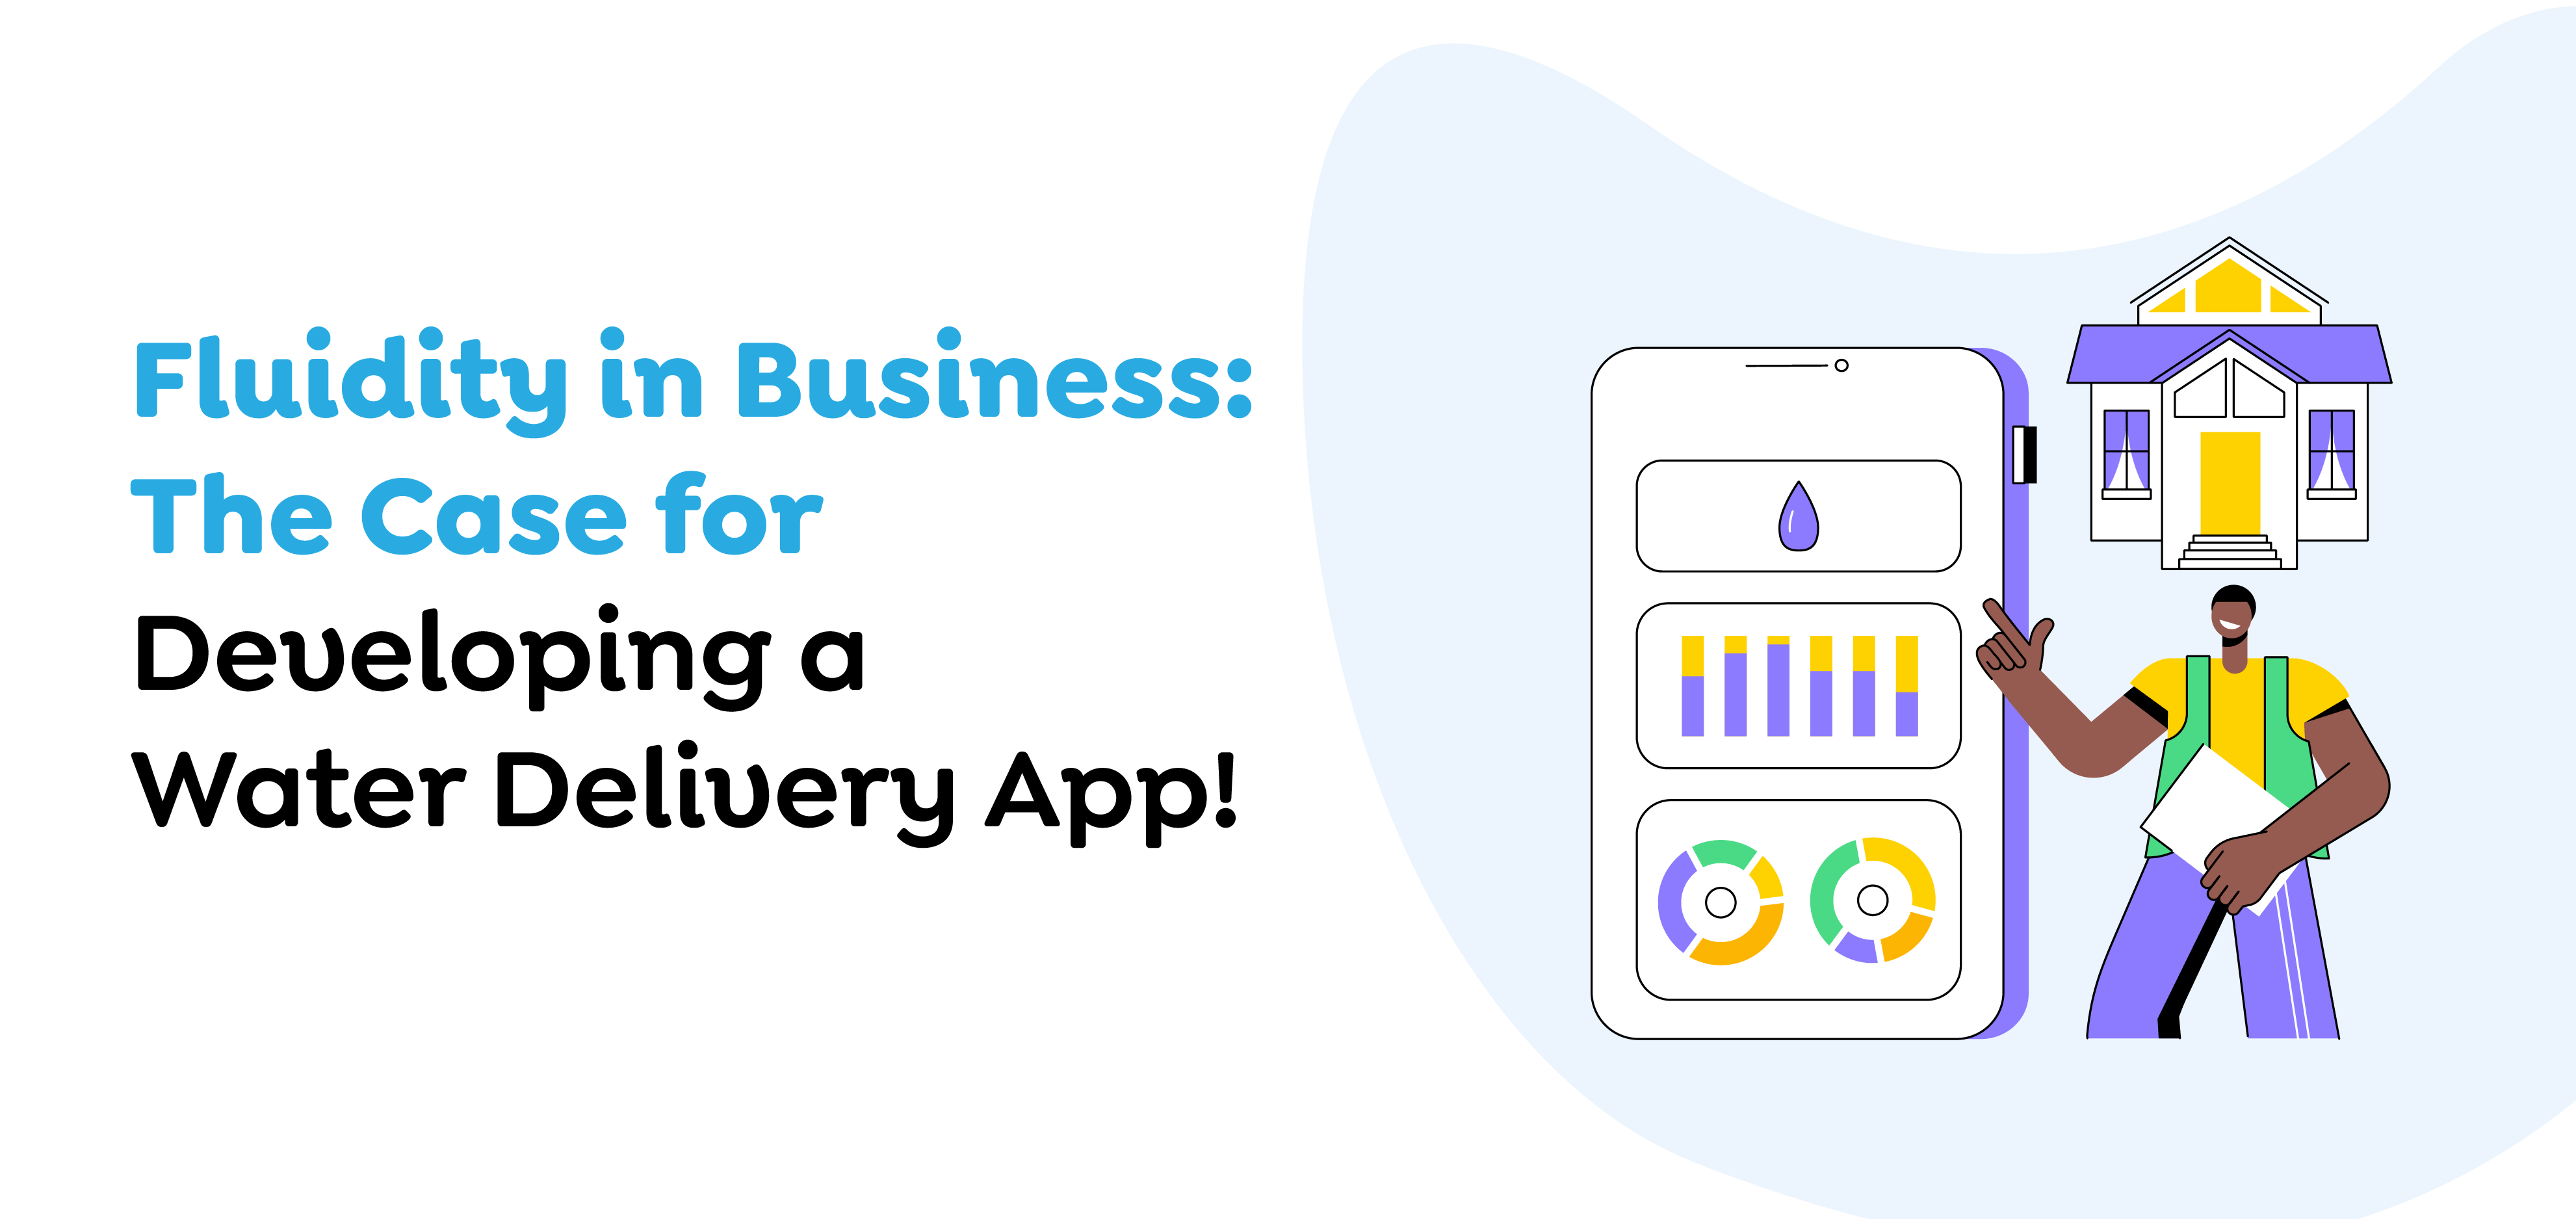 Water Delivery Apps